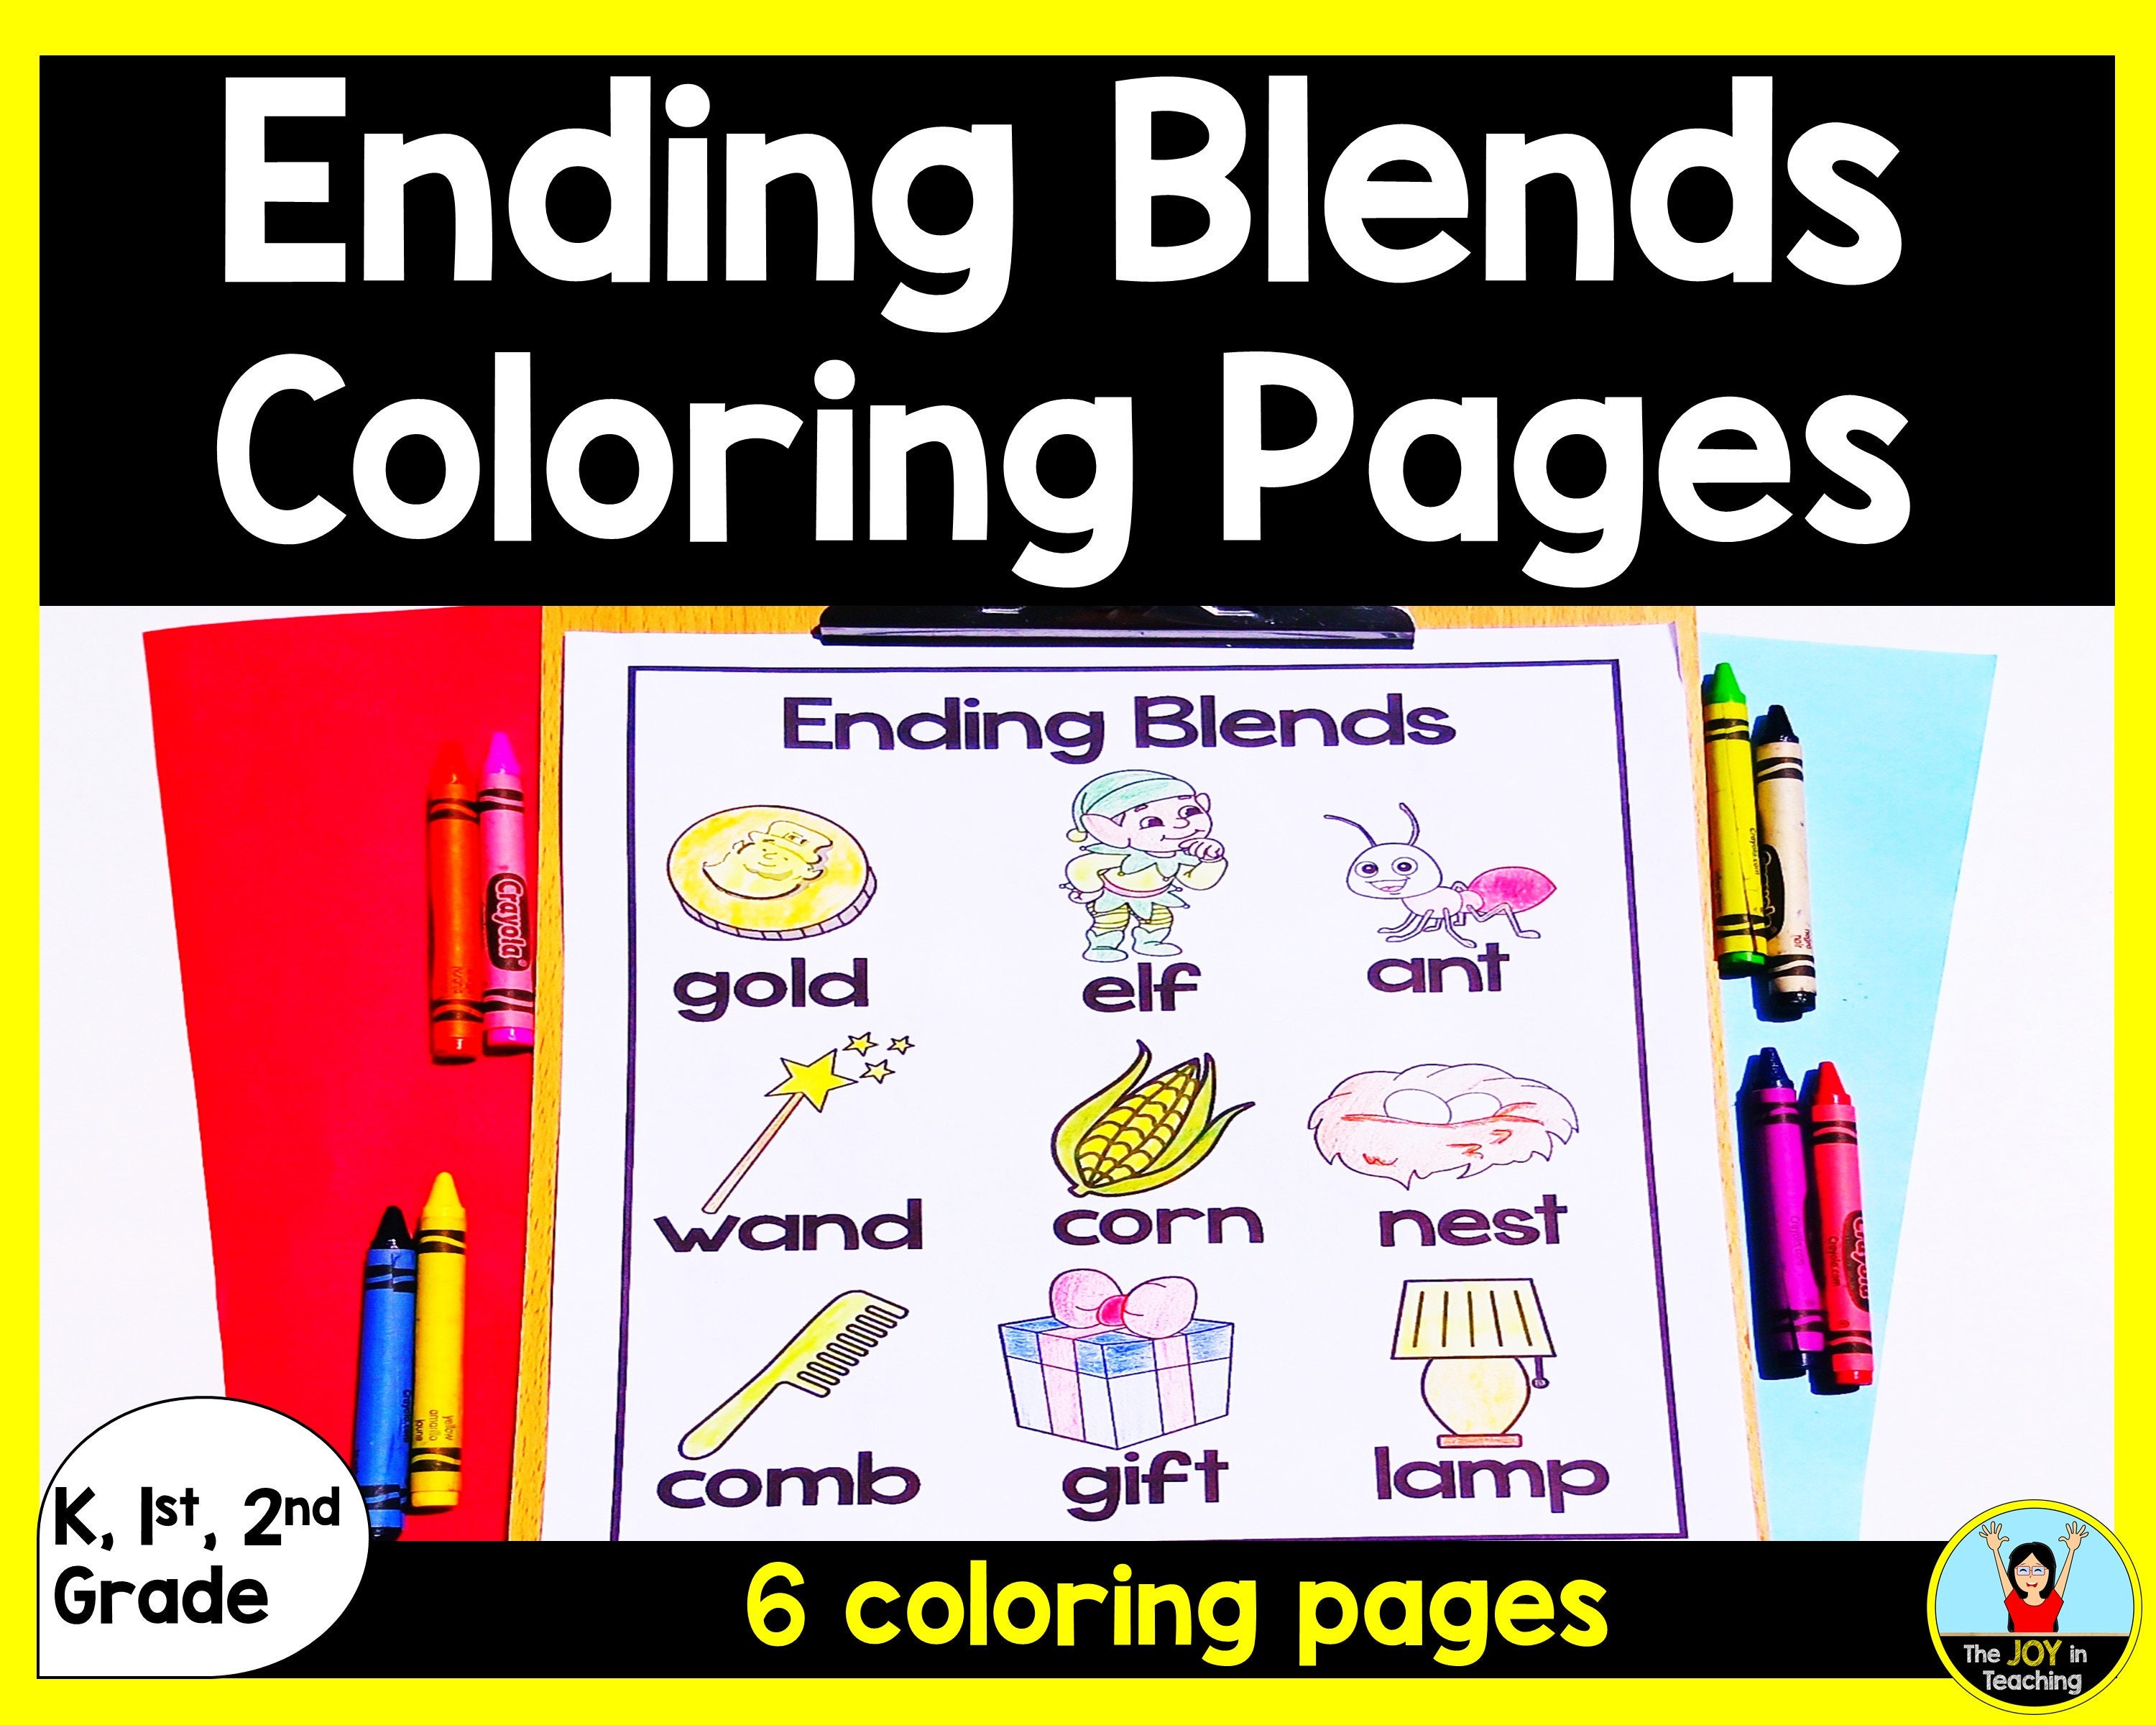 Beginning blends coloring pages